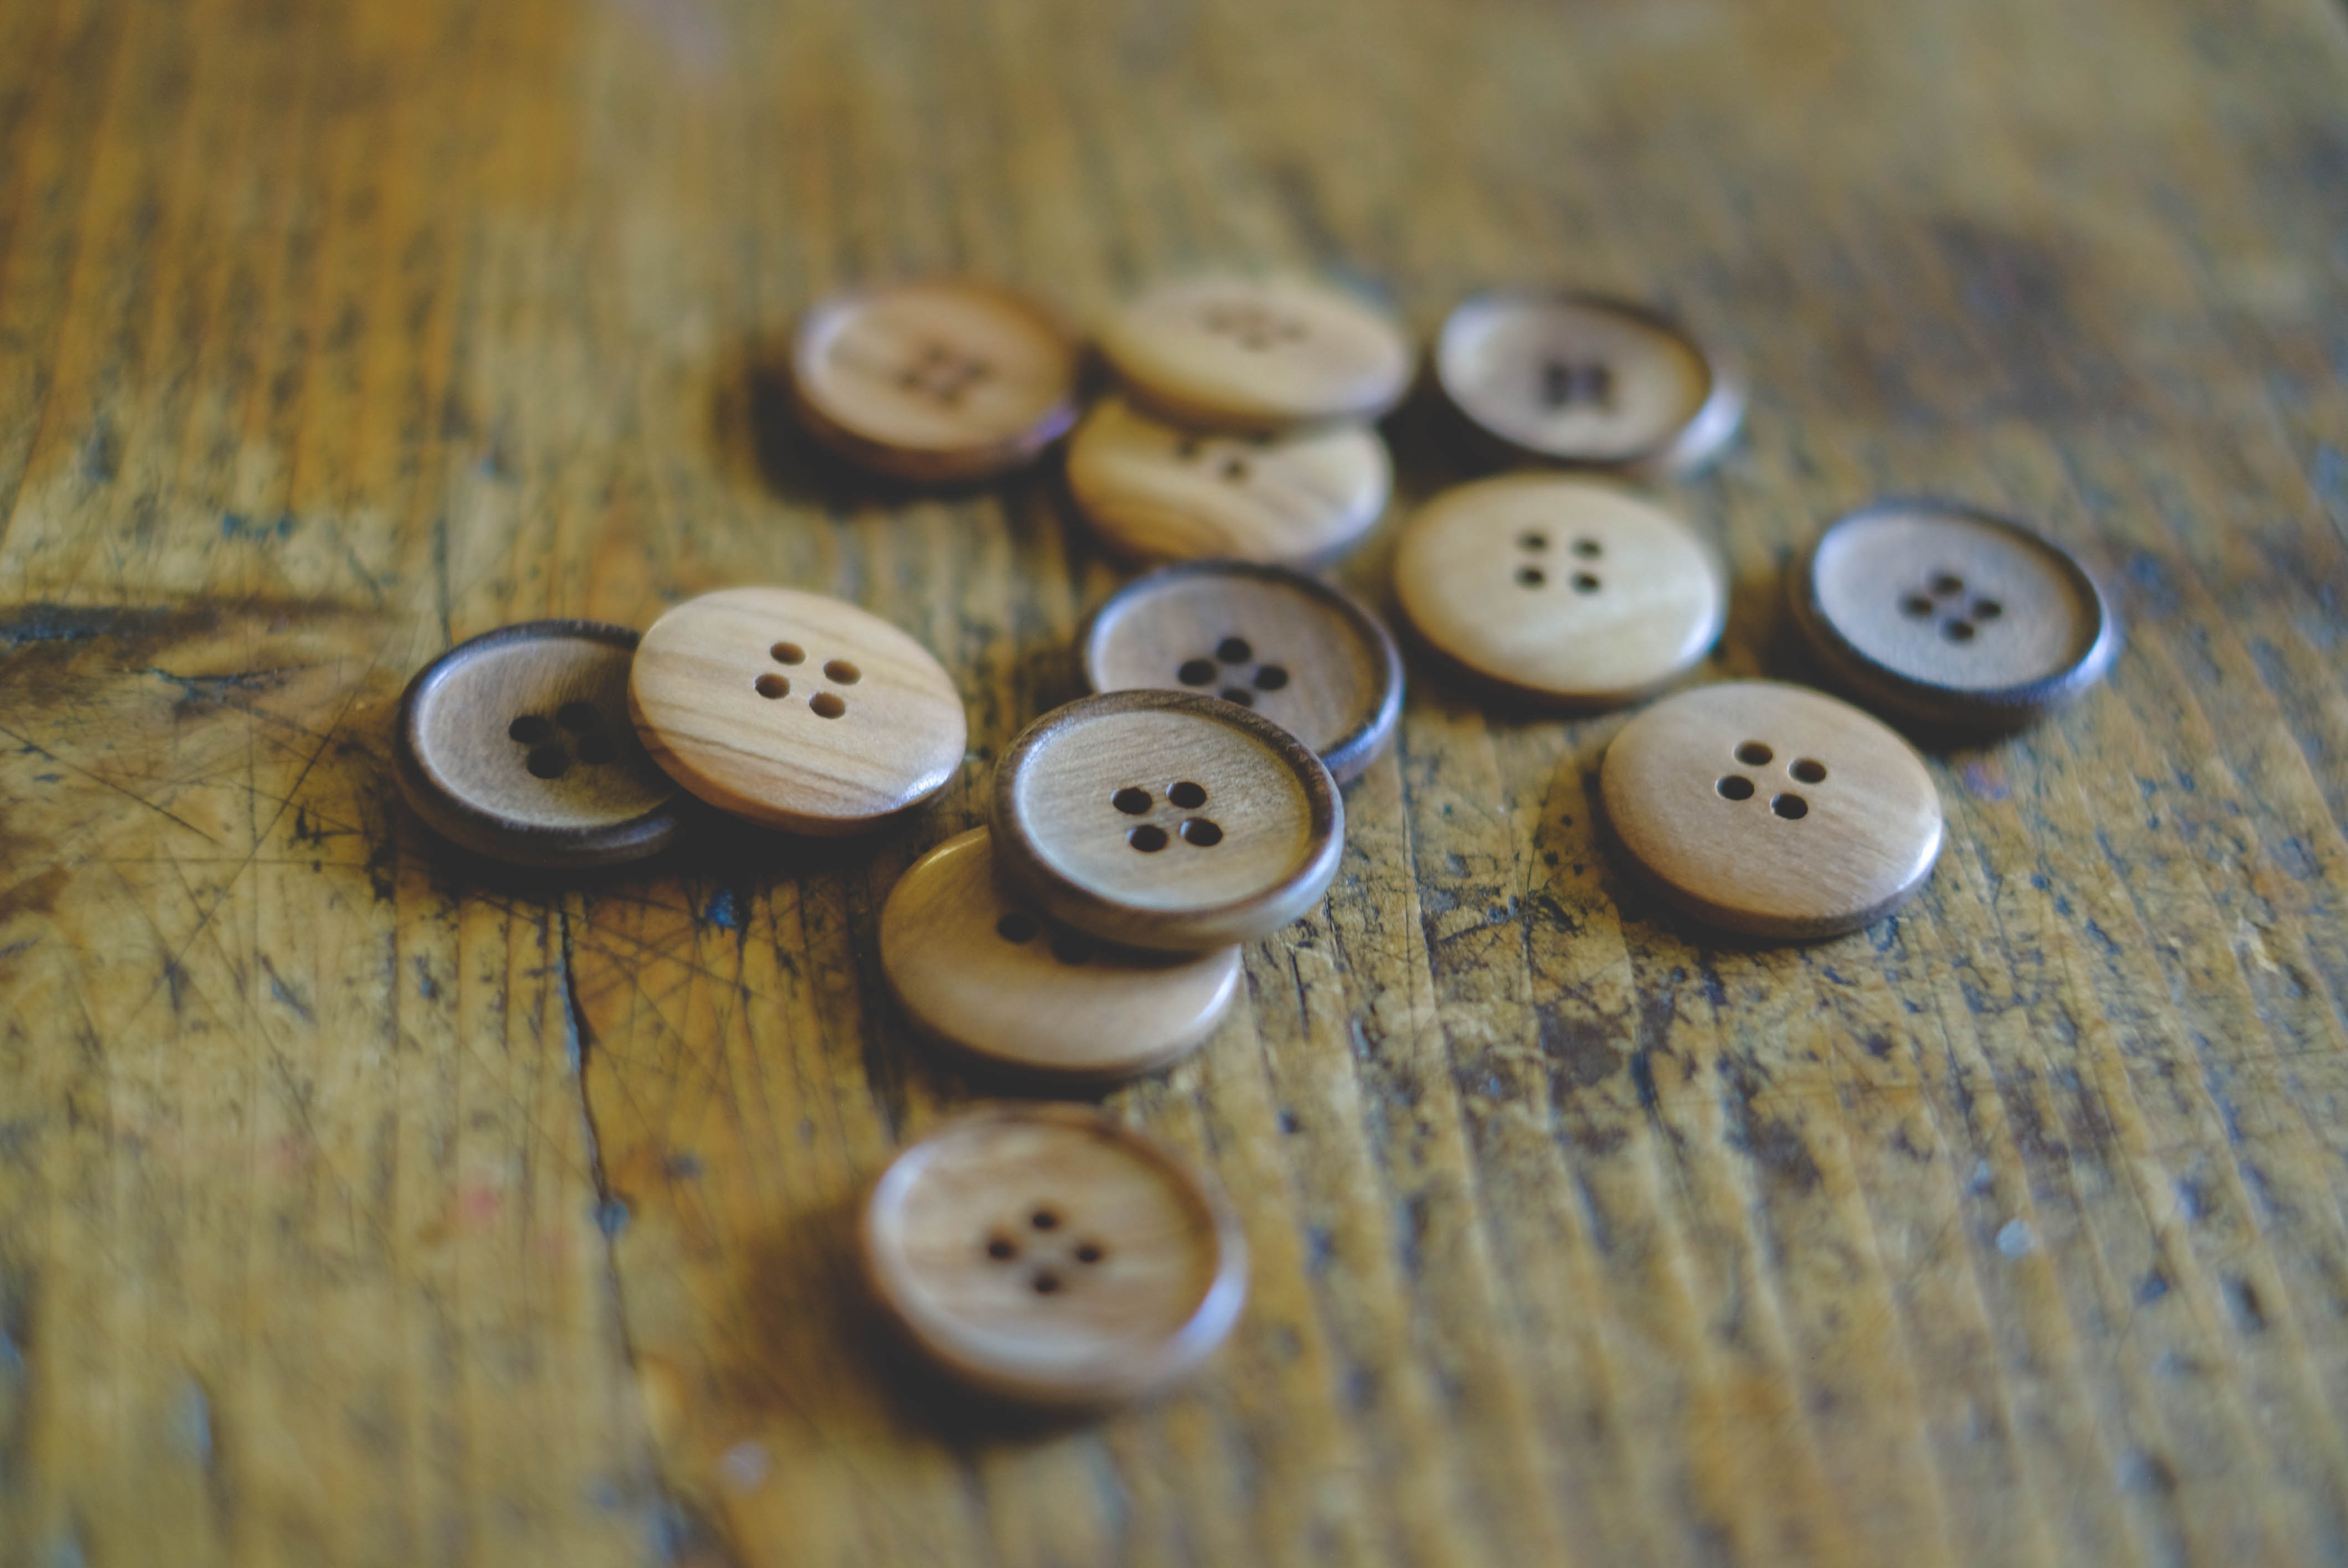 Wood button-18mm